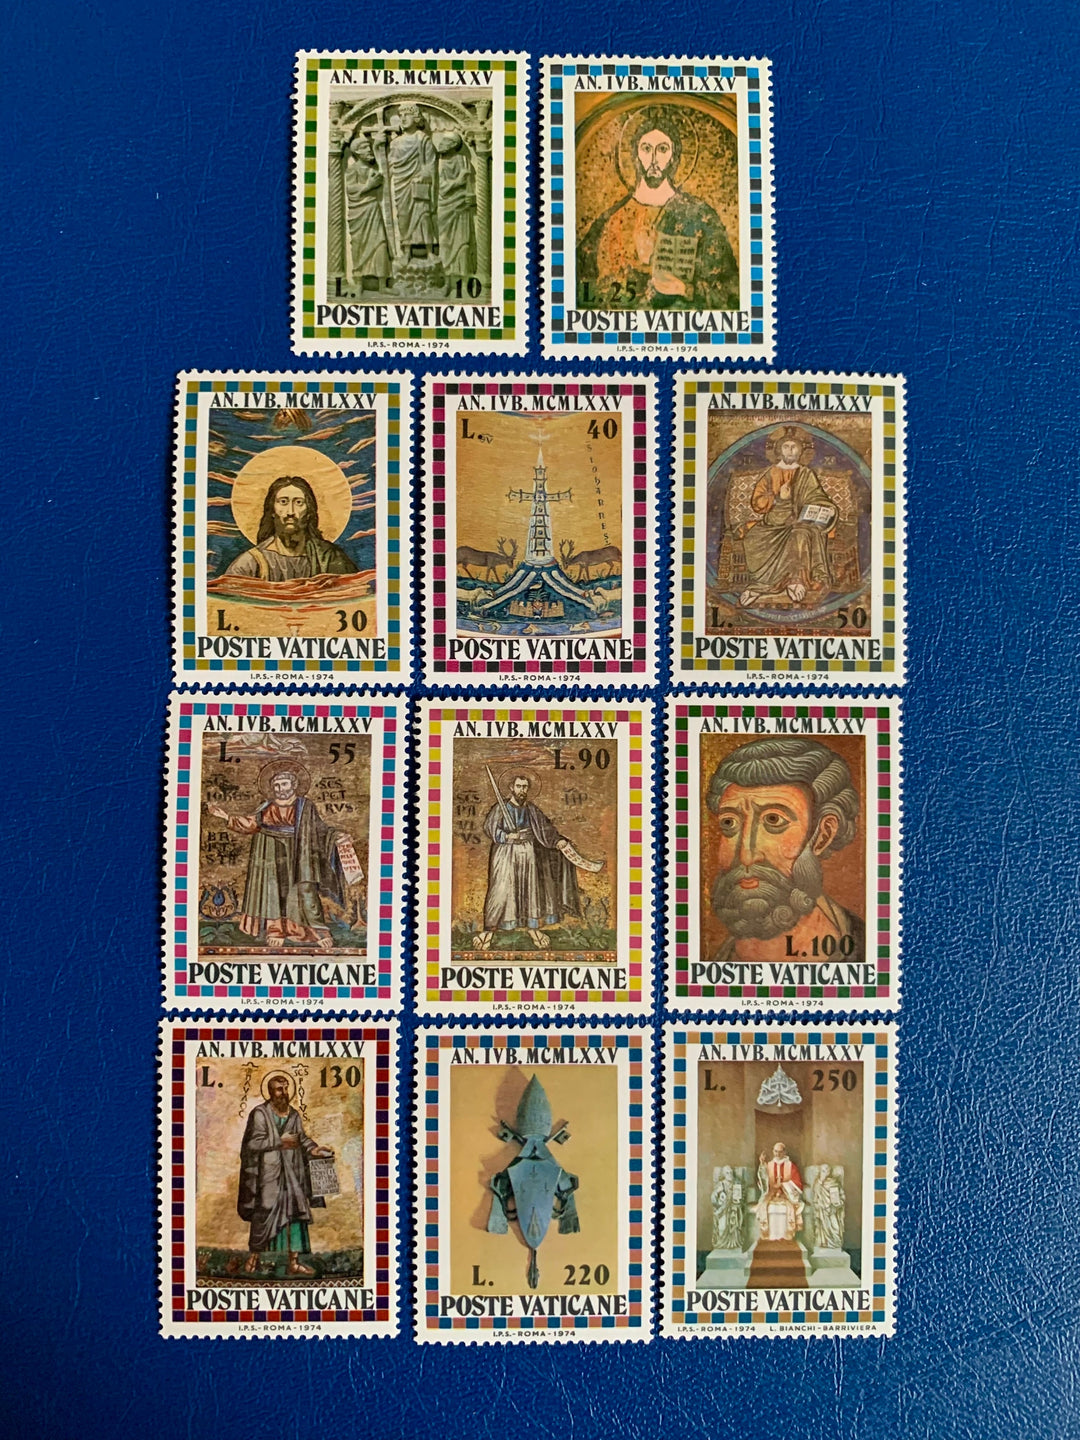 Vatican - Original Vintage Postage Stamps- 1974 - Holy Year - for the collector, artist or crafter